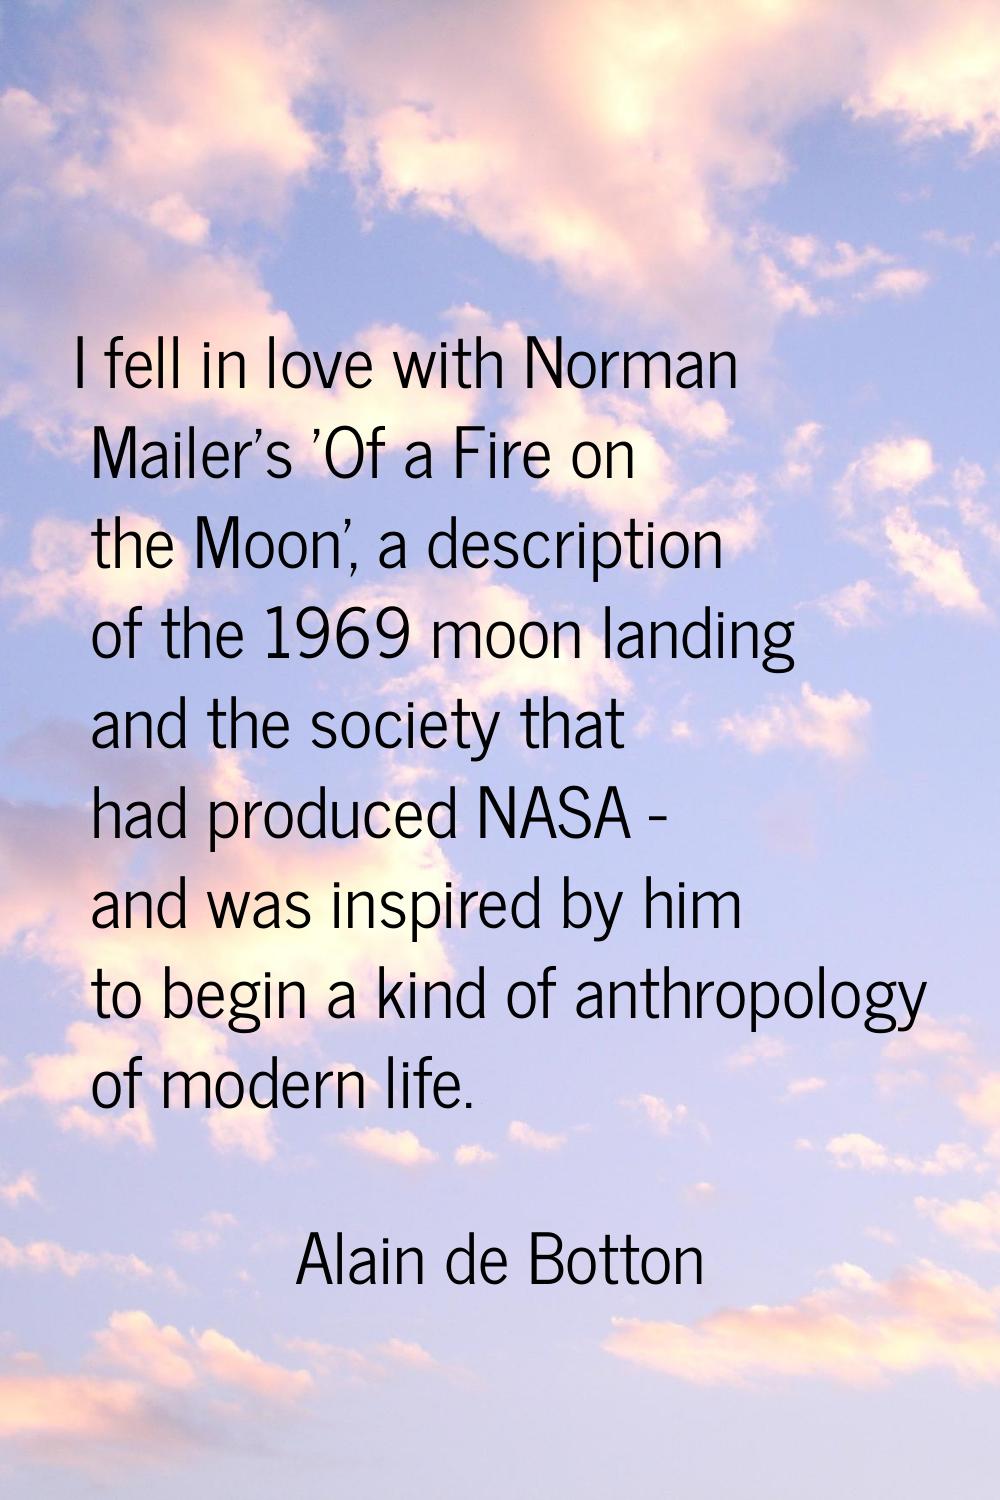 I fell in love with Norman Mailer's 'Of a Fire on the Moon', a description of the 1969 moon landing